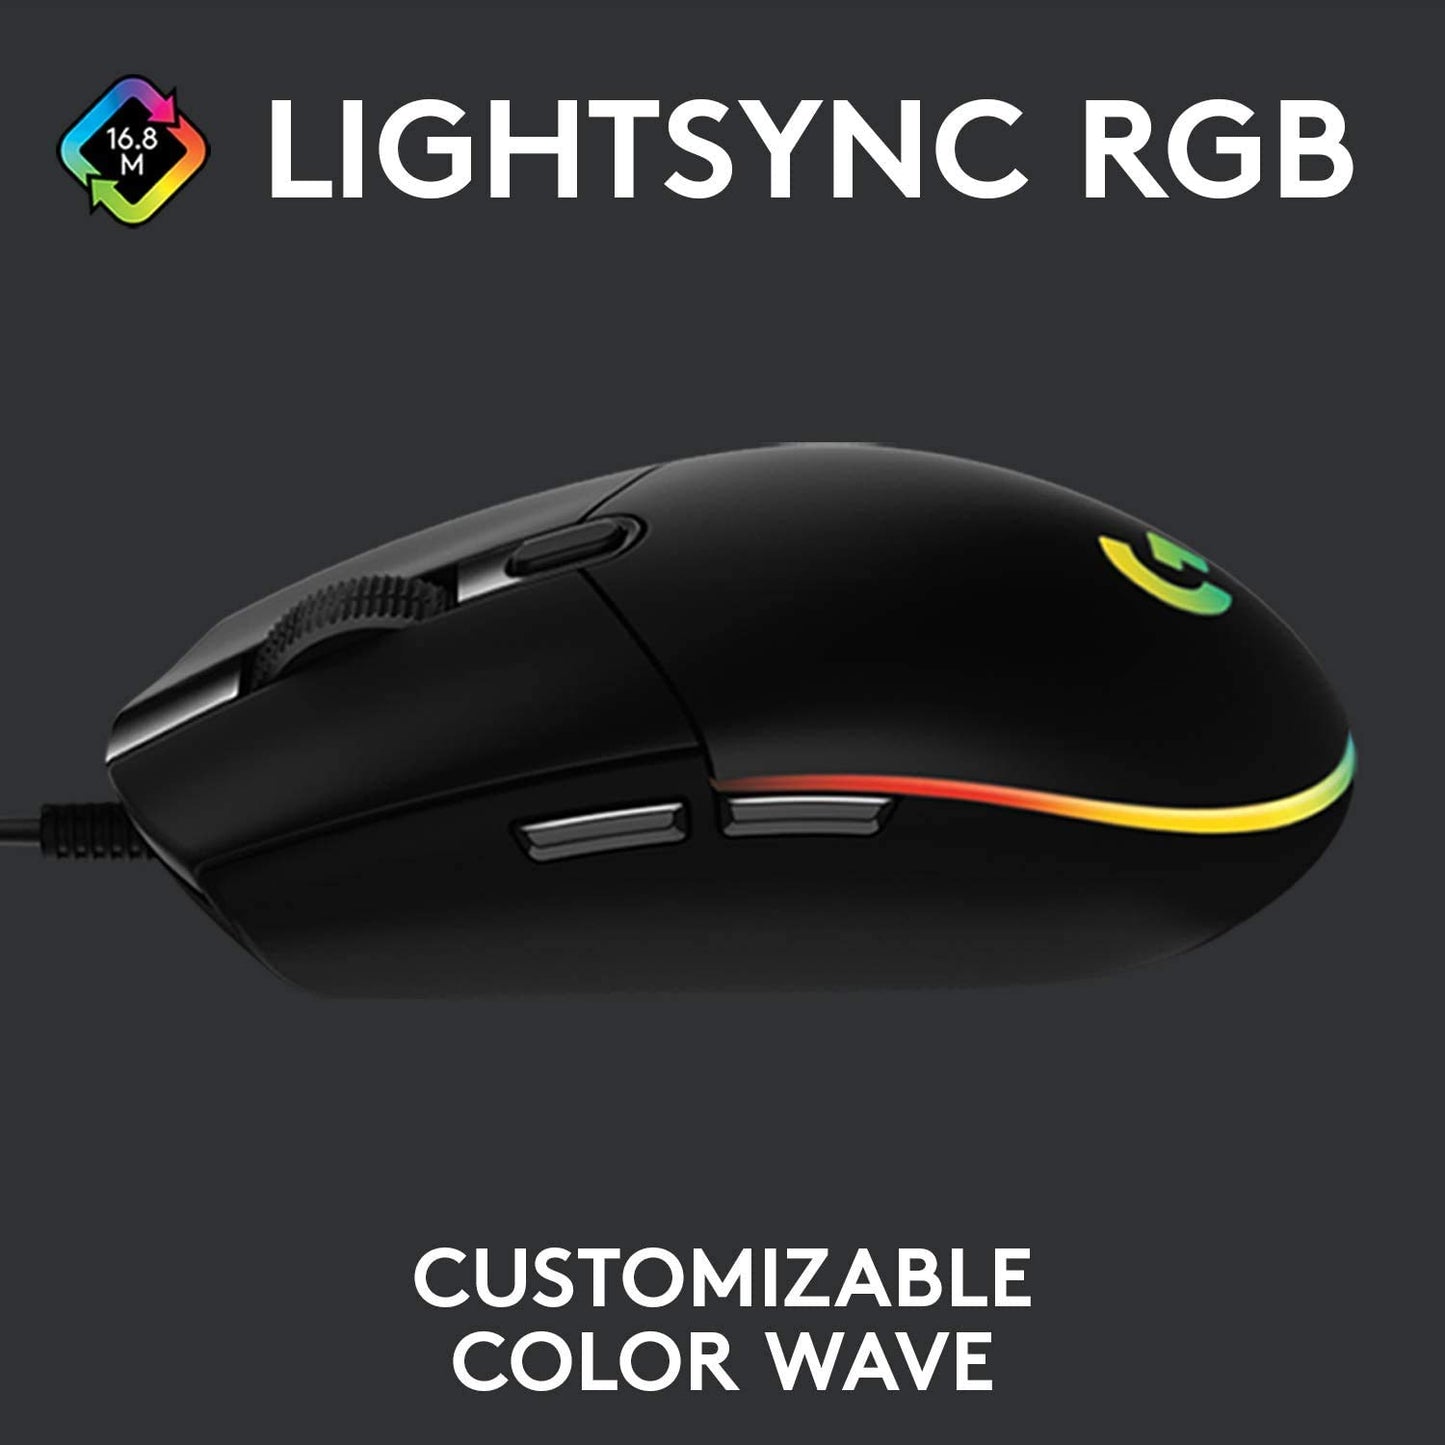 Logitech G203 LIGHTSYNC Wired Gaming Mouse - Black